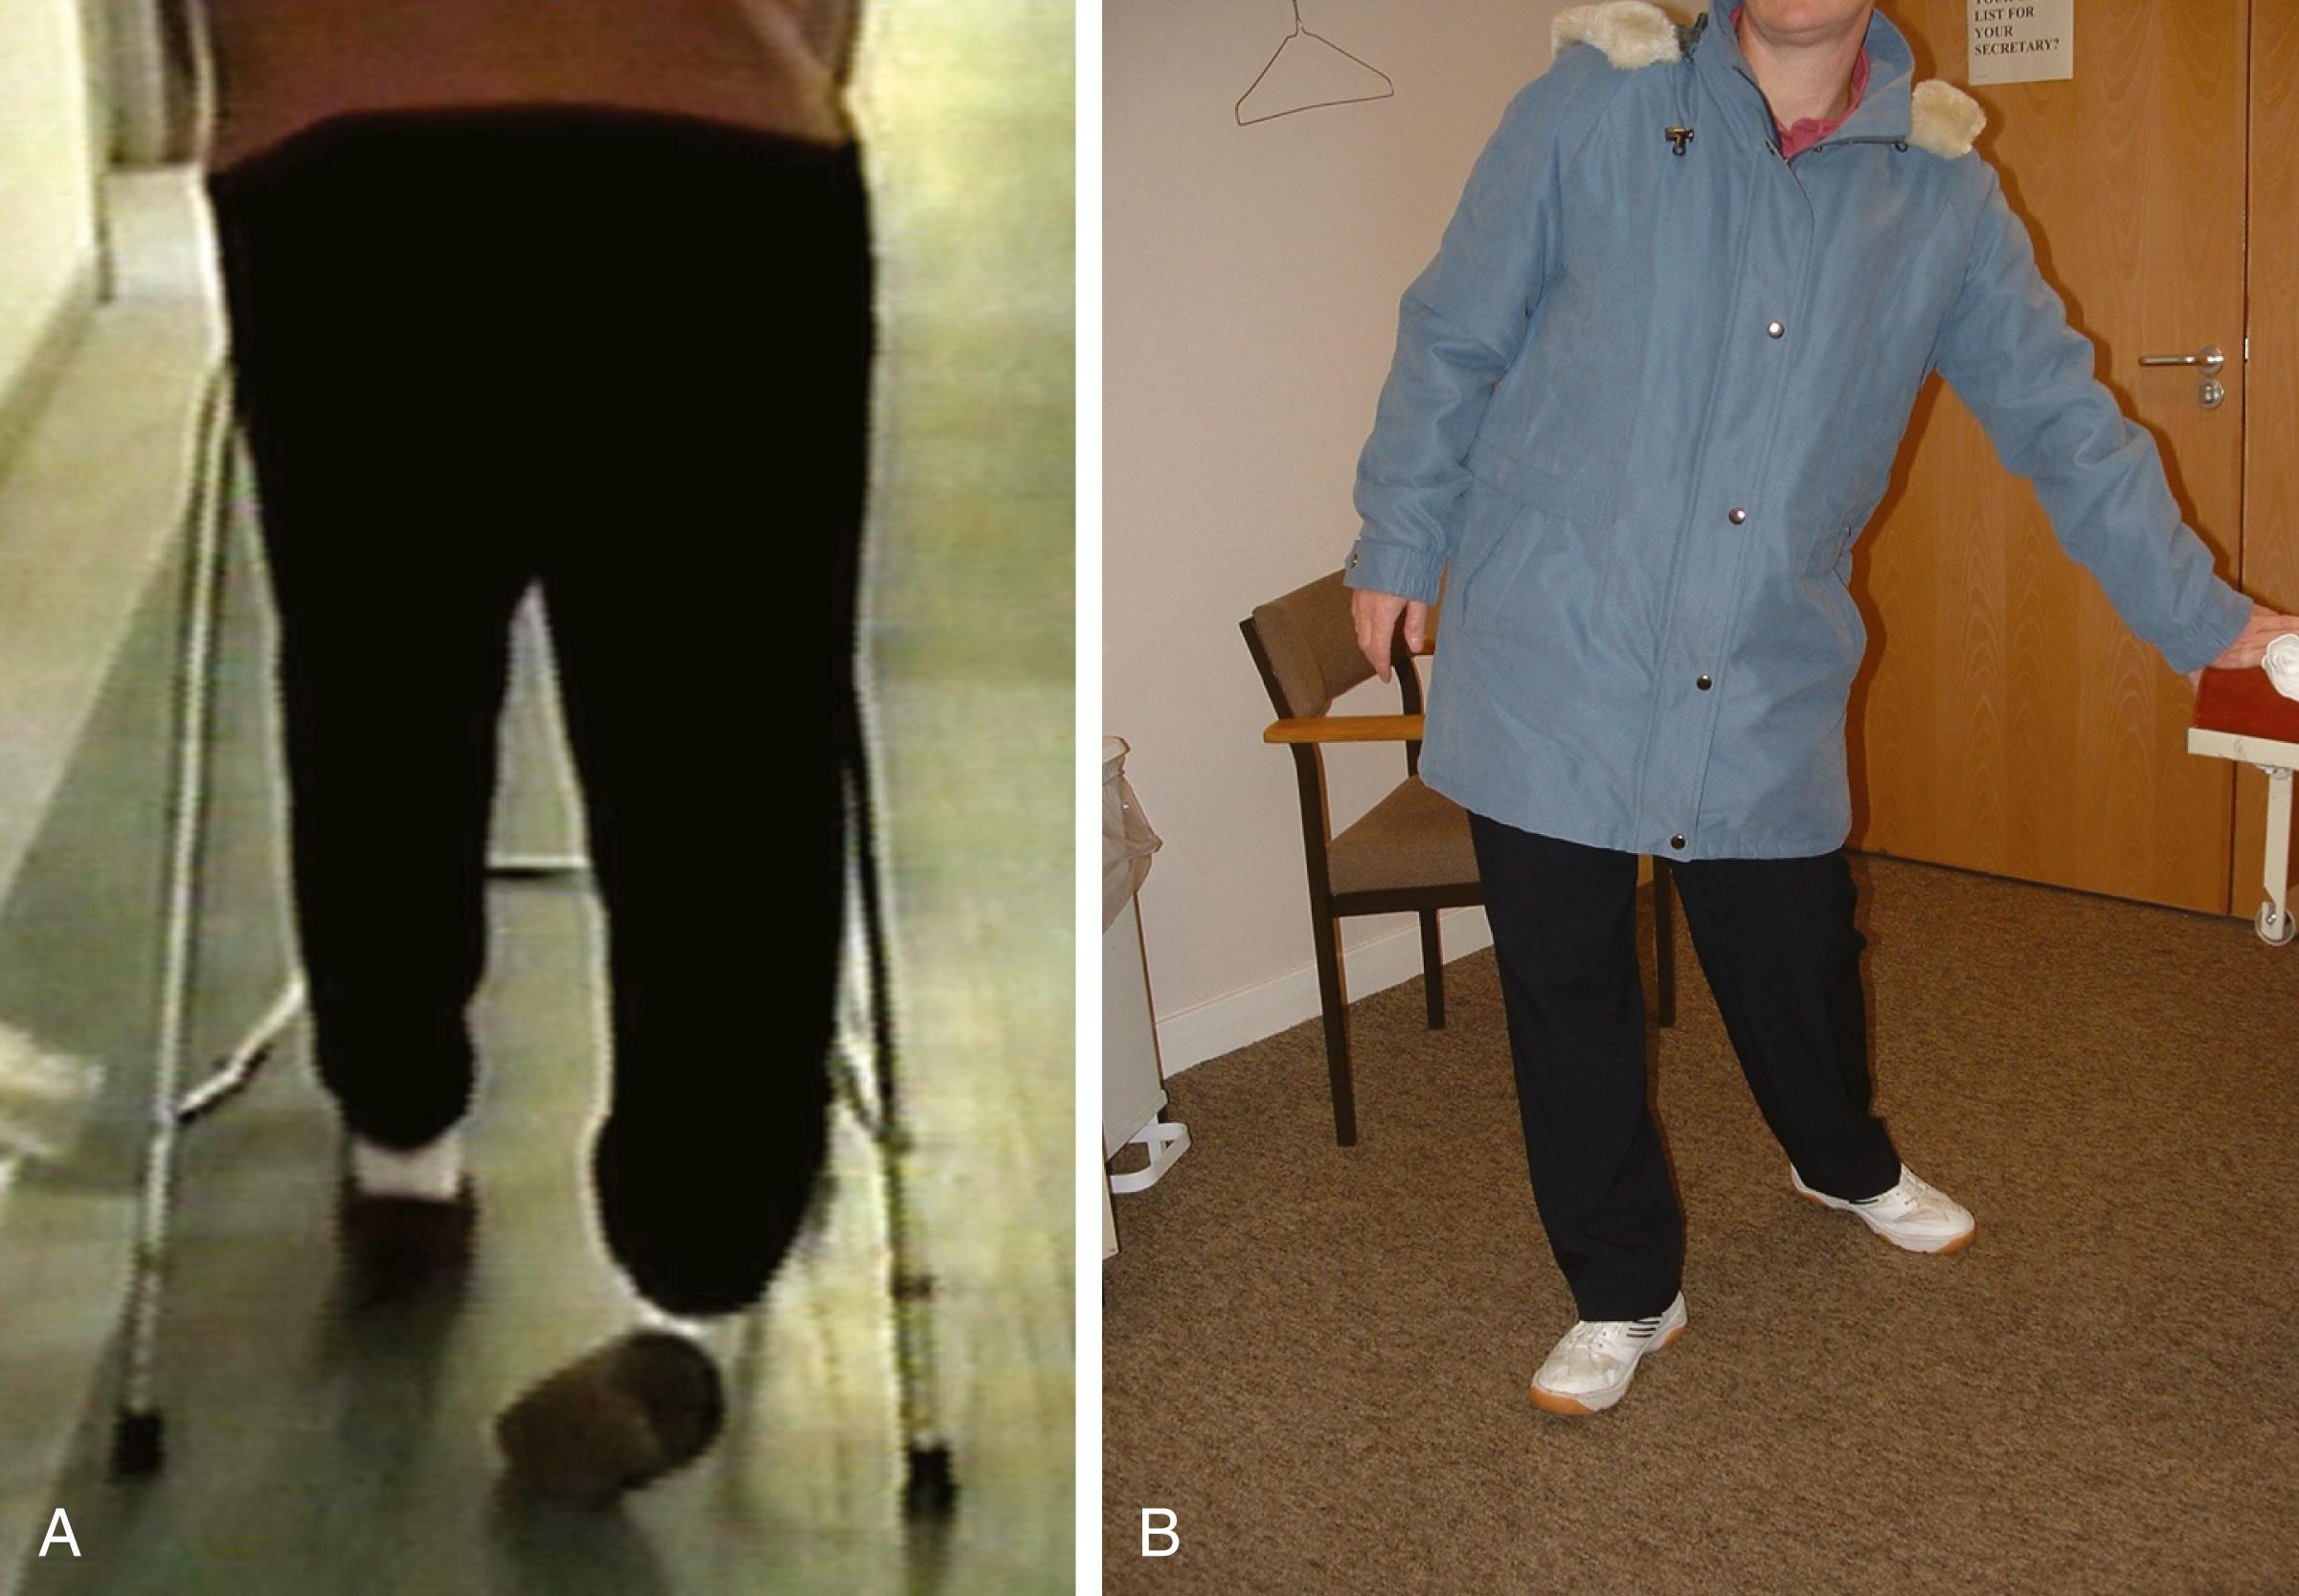 Fig. 113.3, A dragging gait with external (B) or internal (A) hip rotation is characteristic of functional leg weakness.